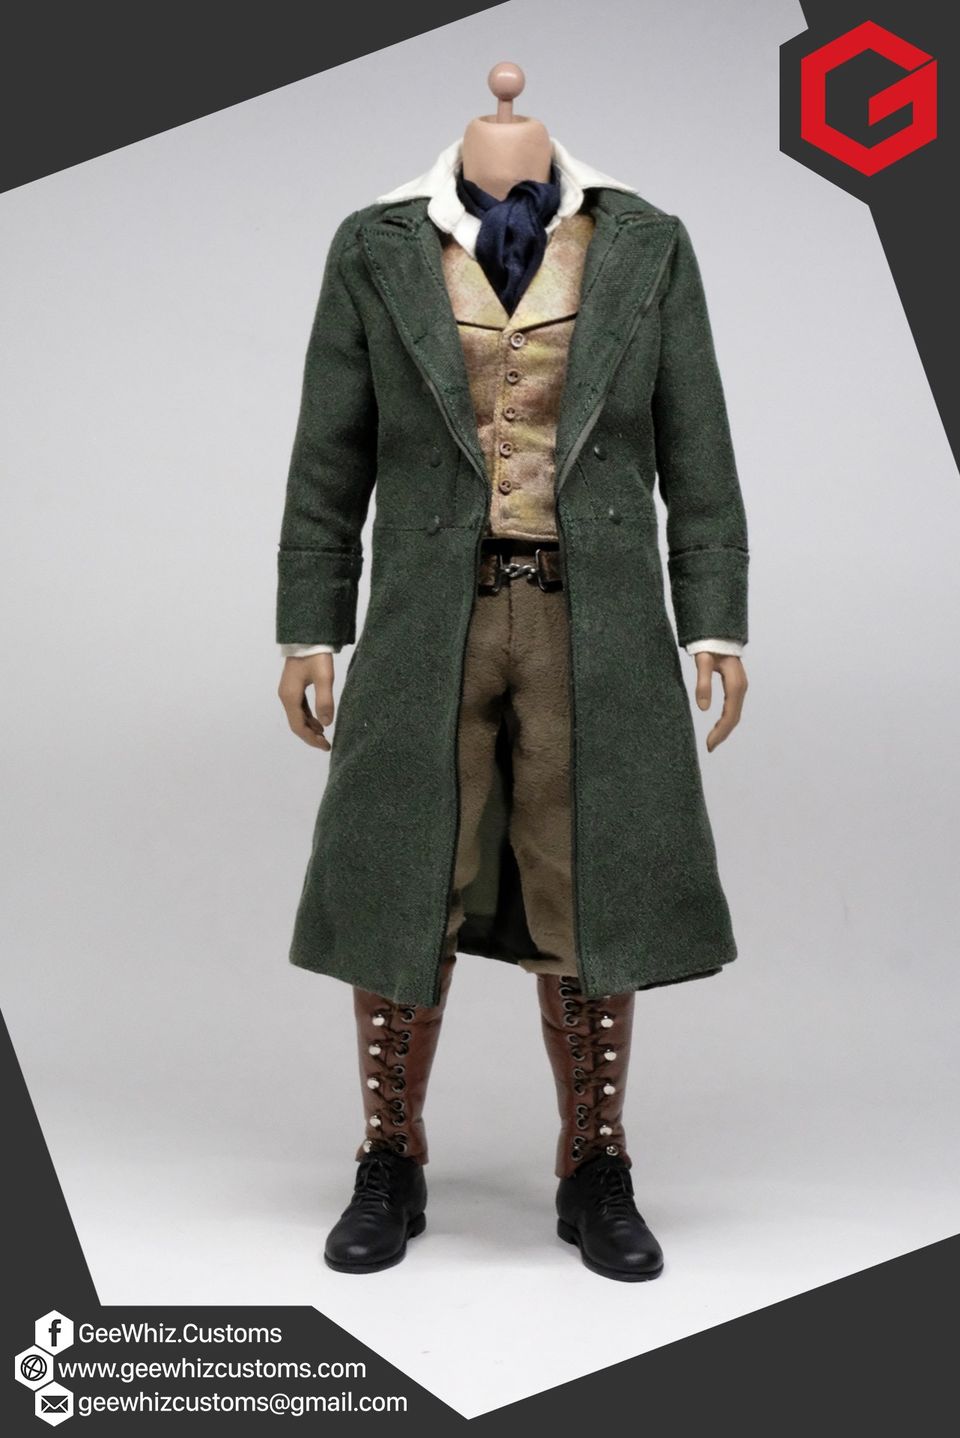 Geewhiz Customs: The Night of the Doctor 1:6 Scale Outfit